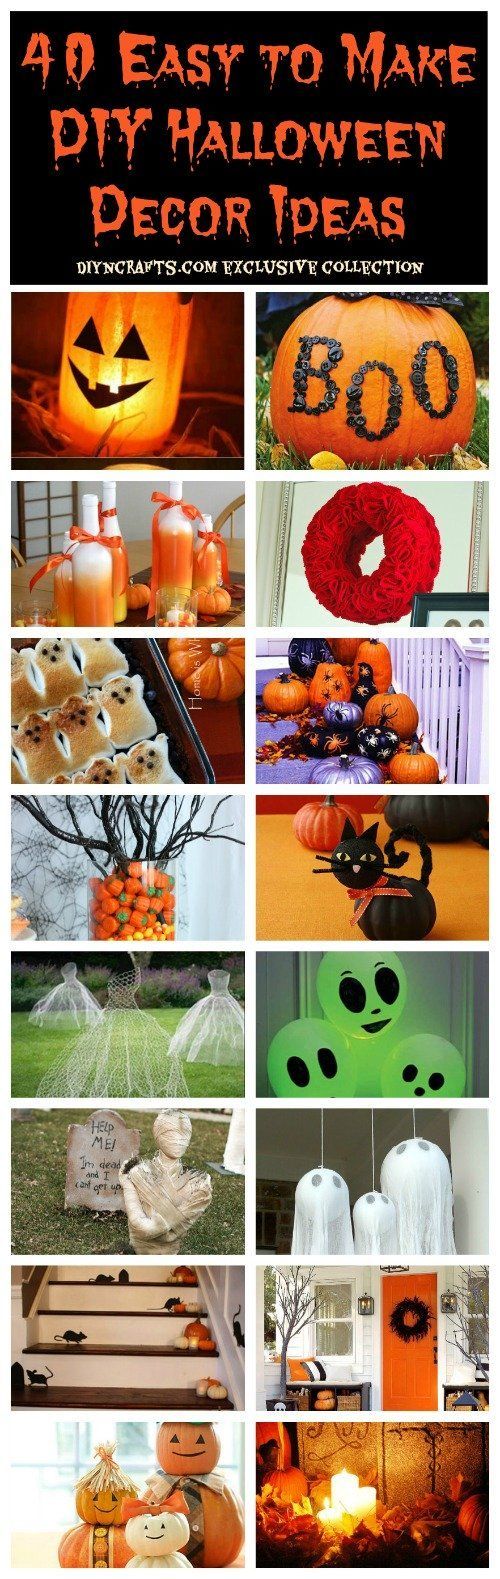 Halloween is a great time for decorating. Many people spend days, not to mention